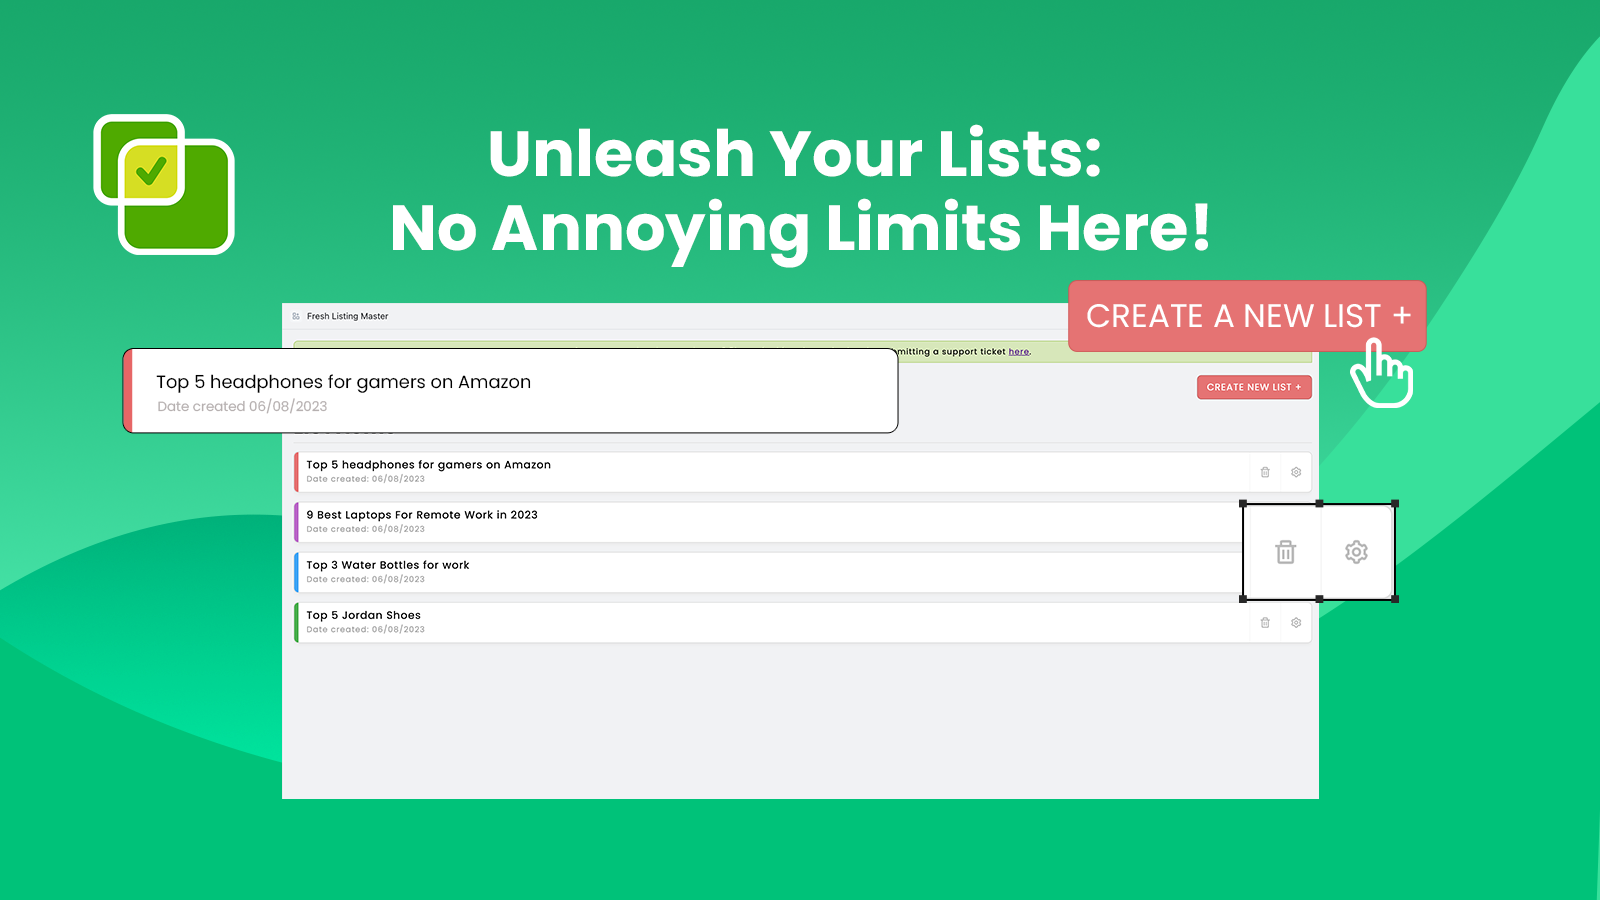 Unleash Your Lists: No Annoying Limits Here!